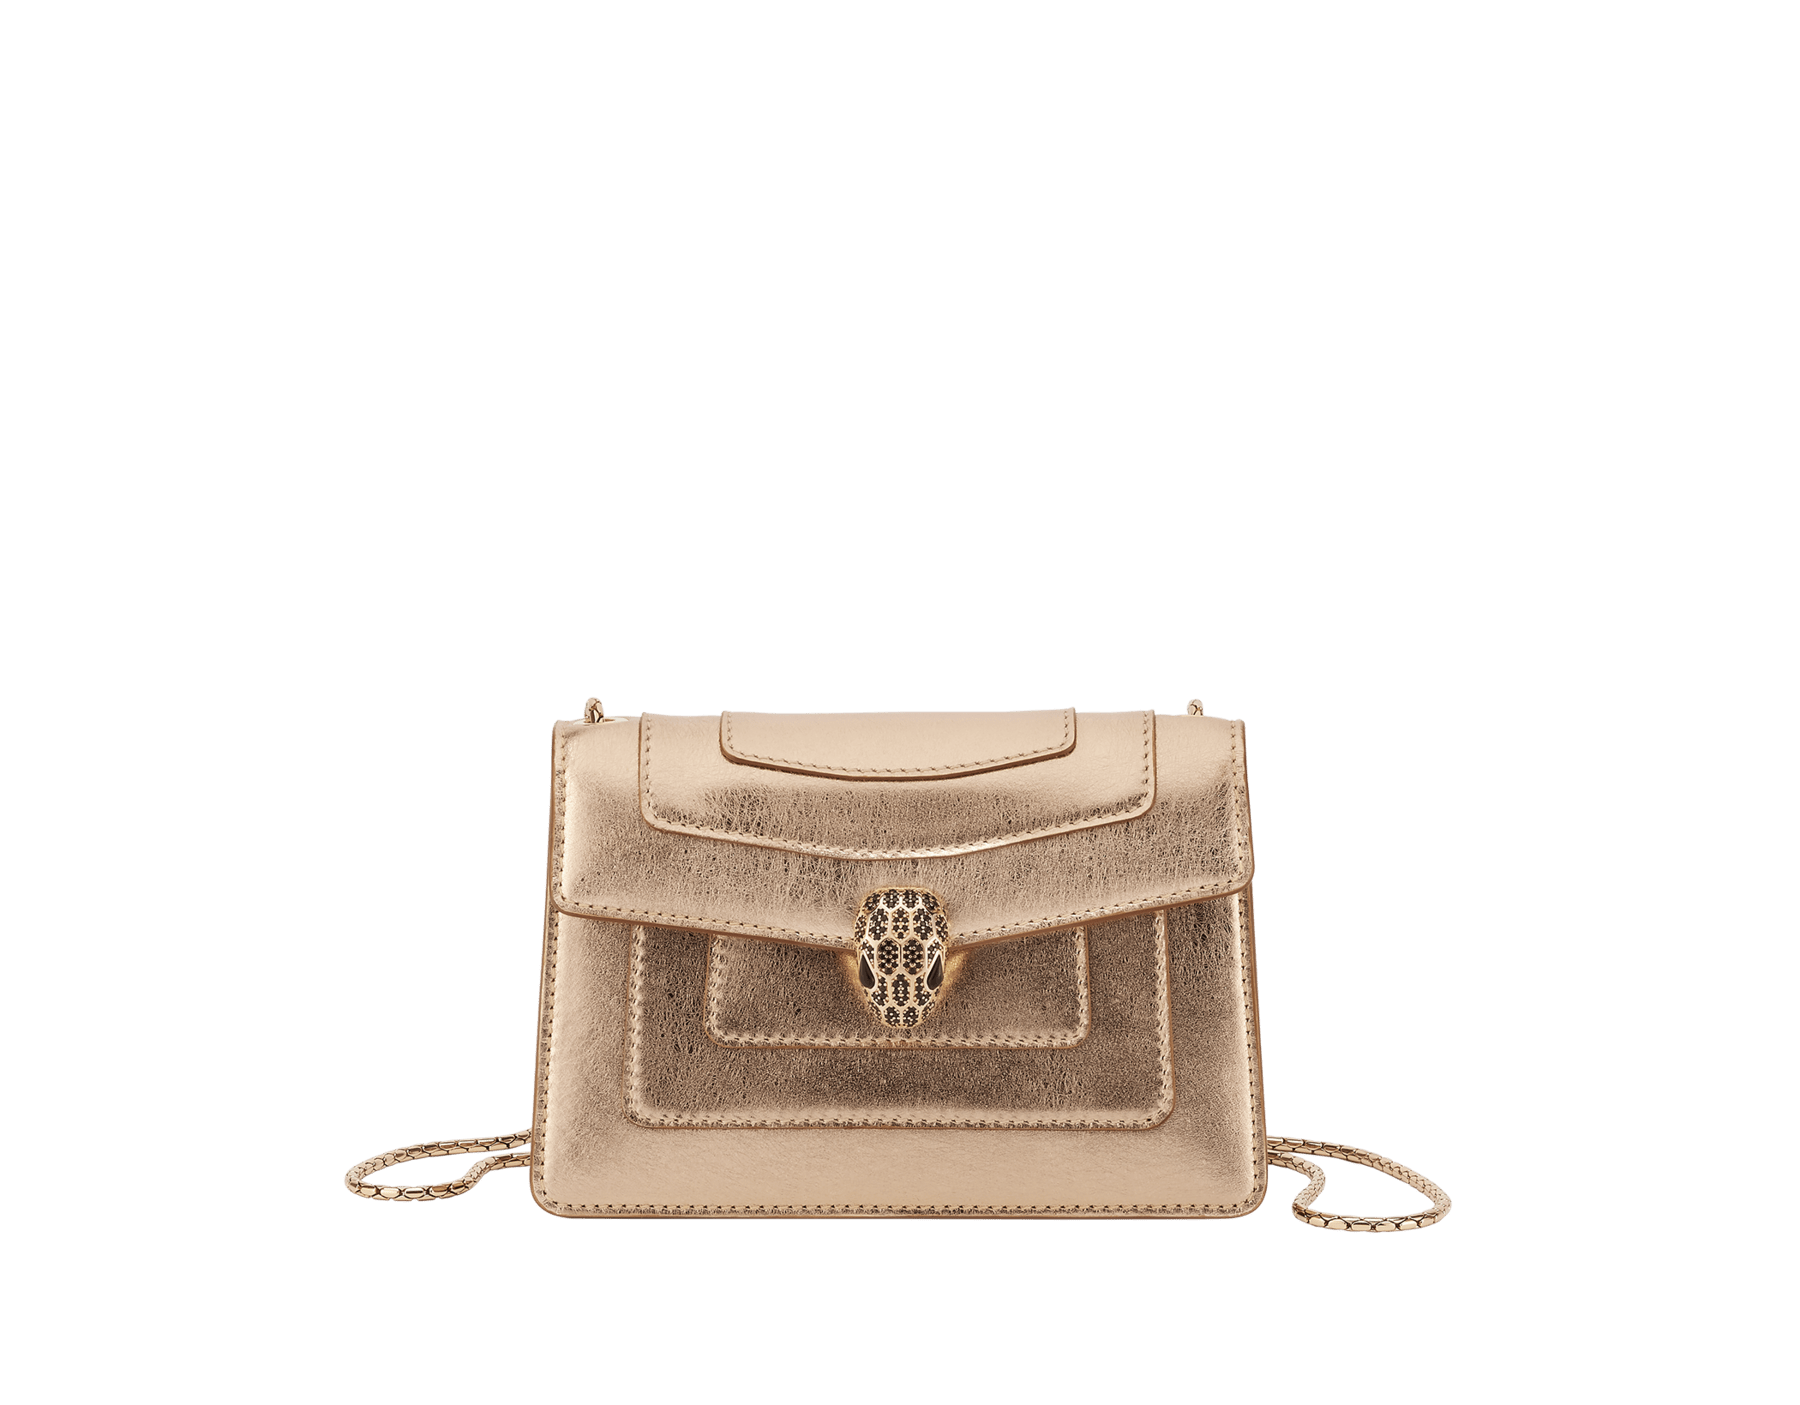 Serpenti Forever mini crossbody bag in light gold Striated calf leather with crystal rose nappa leather lining. Captivating snakehead magnetic closure in light gold-plated brass embellished with black zirconia pavé scales, and black onyx eyes. 293214 image 1